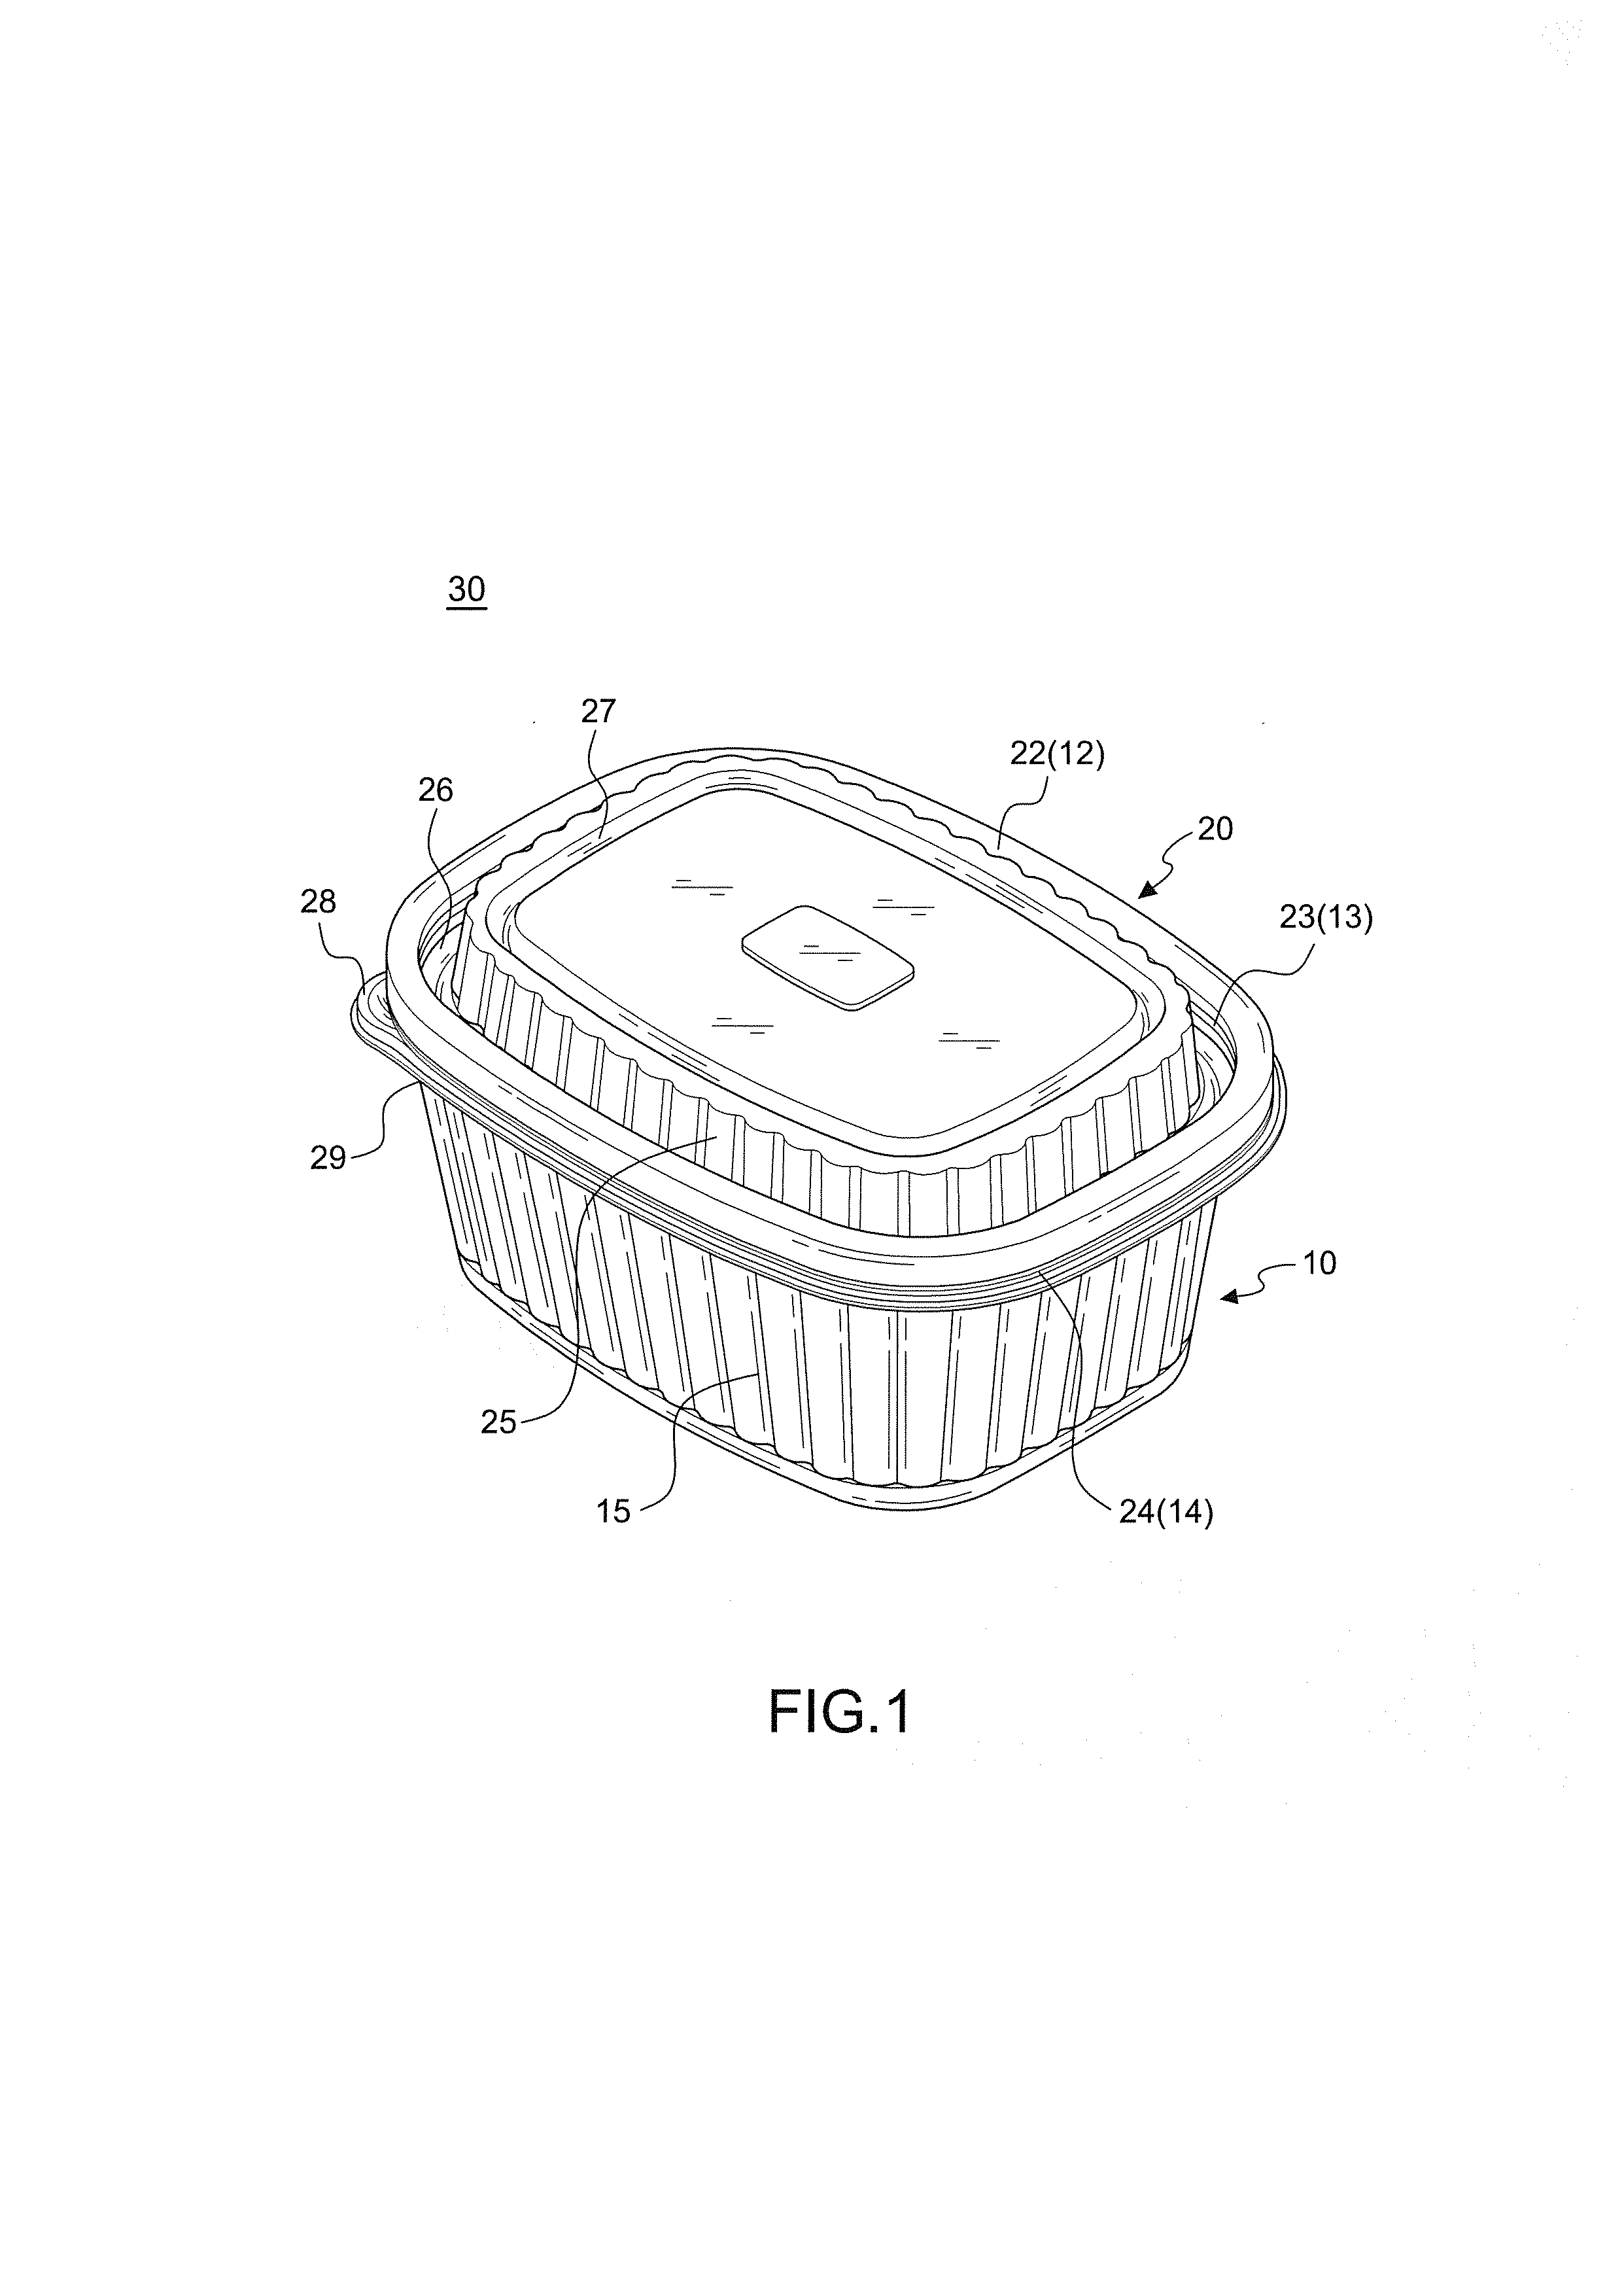 Rectangular food container with double sealing structure